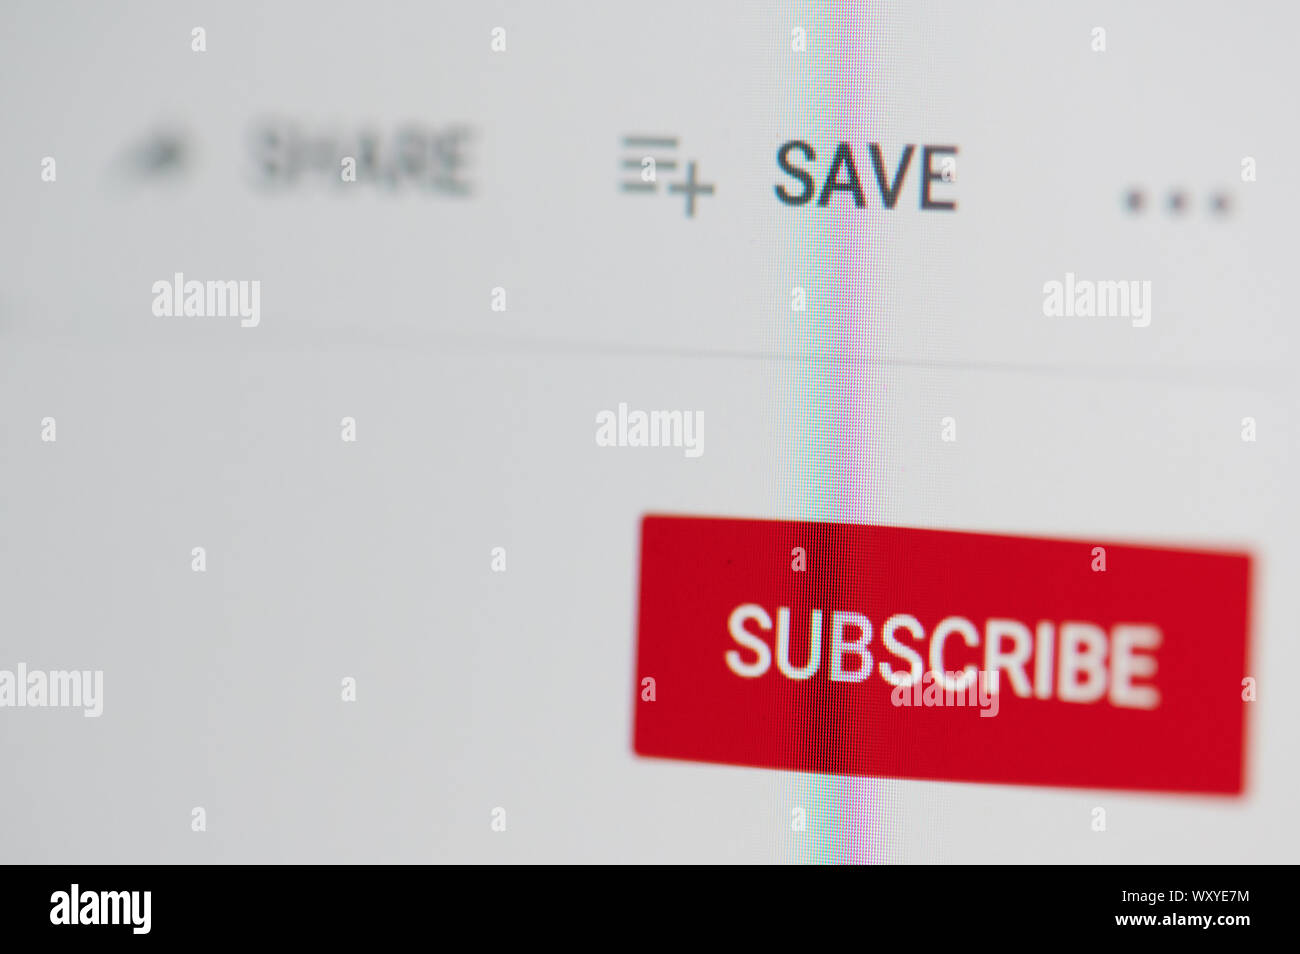 New york, USA - september 18, 2019: Subscribe button on youtube channel on laptop screen close up view Stock Photo